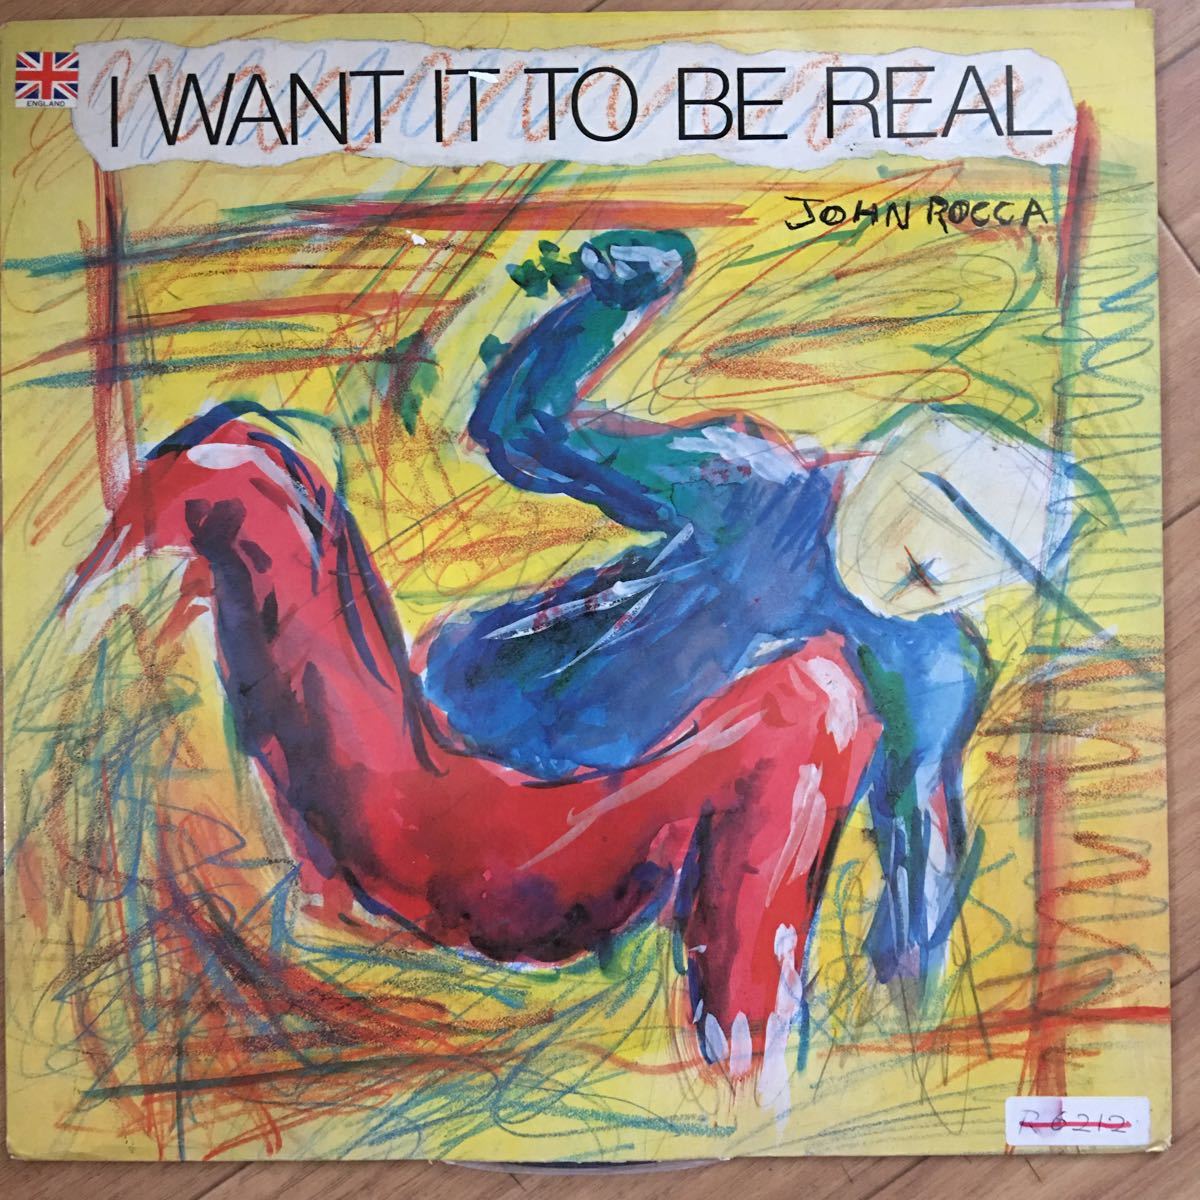 12* John Rocca-I want it to be real